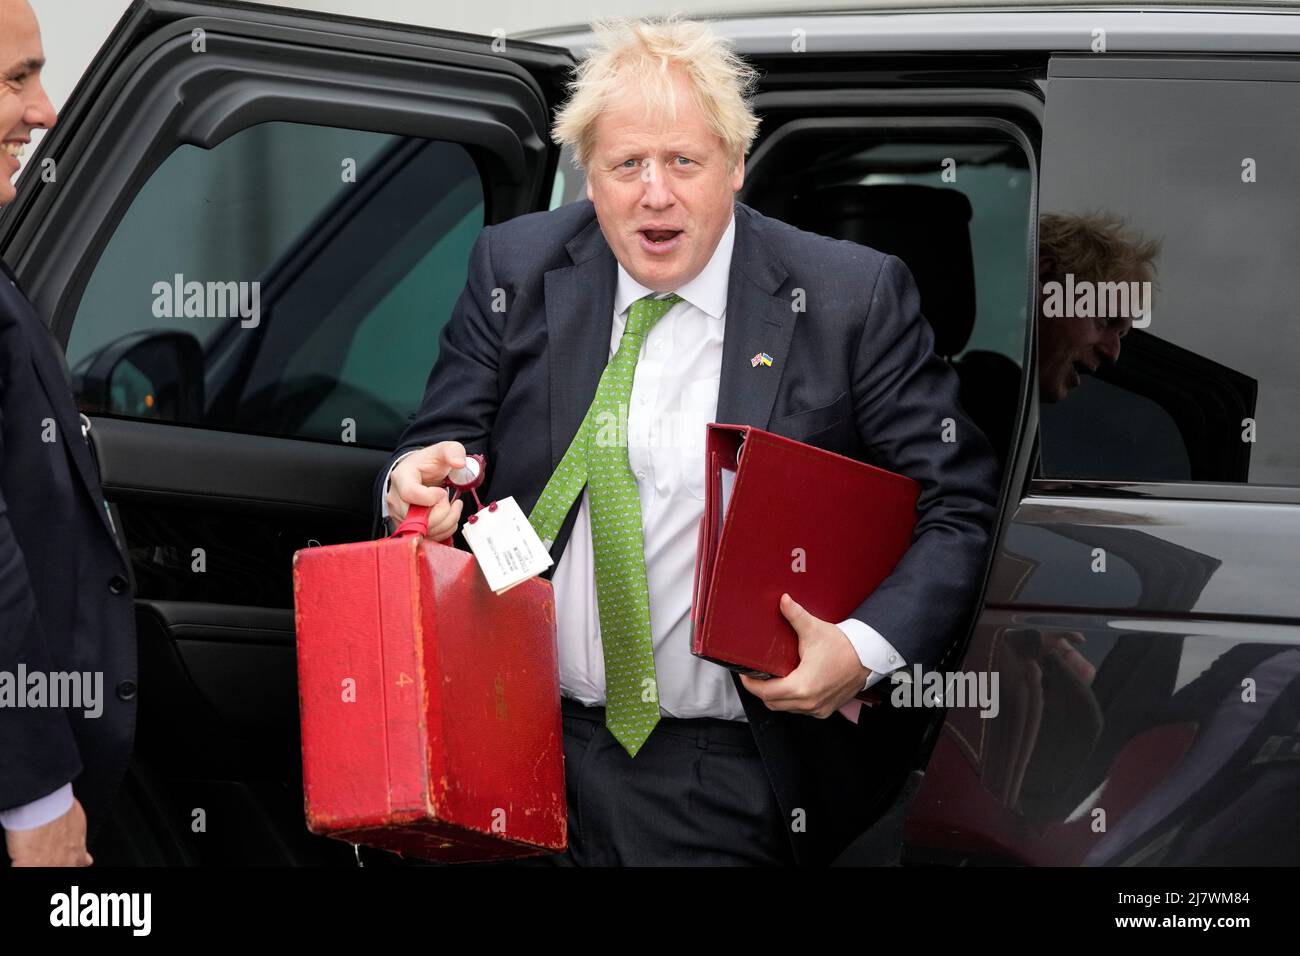 British Prime Minister Boris Johnson arrives at London Stansted Airport to visit Sweden and Finland, Britain, May 11, 2022. Frank Augstein/Pool via REUTERS Stock Photo